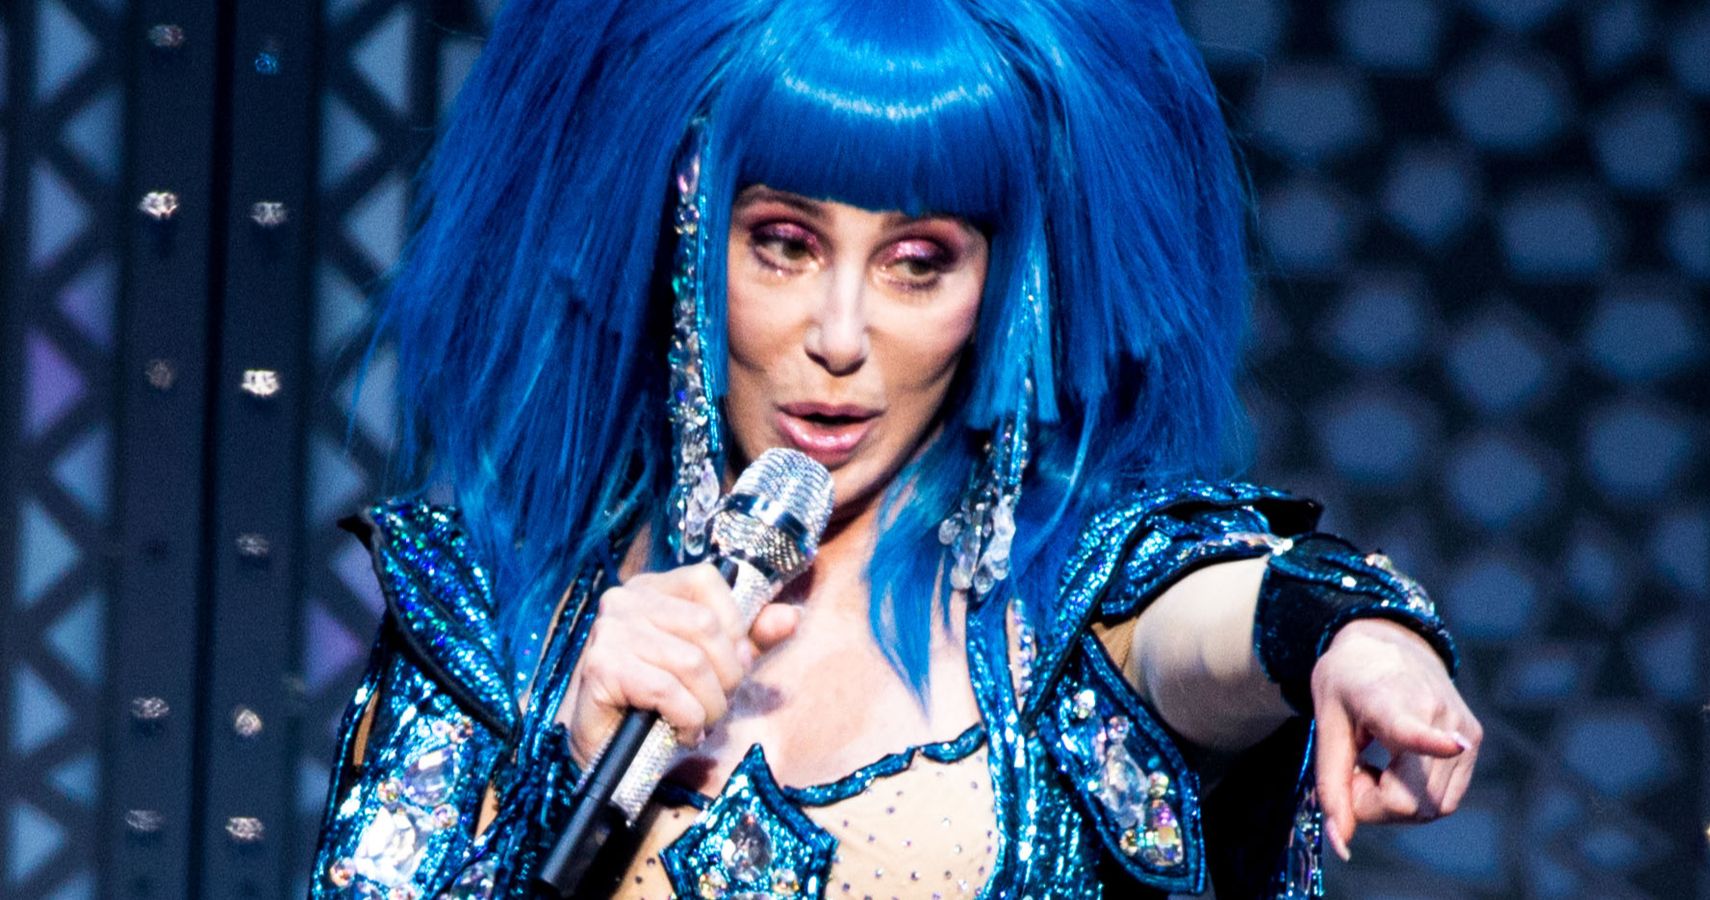 London, UK - October 20th 2019: Cher performing live at the O2 Arena